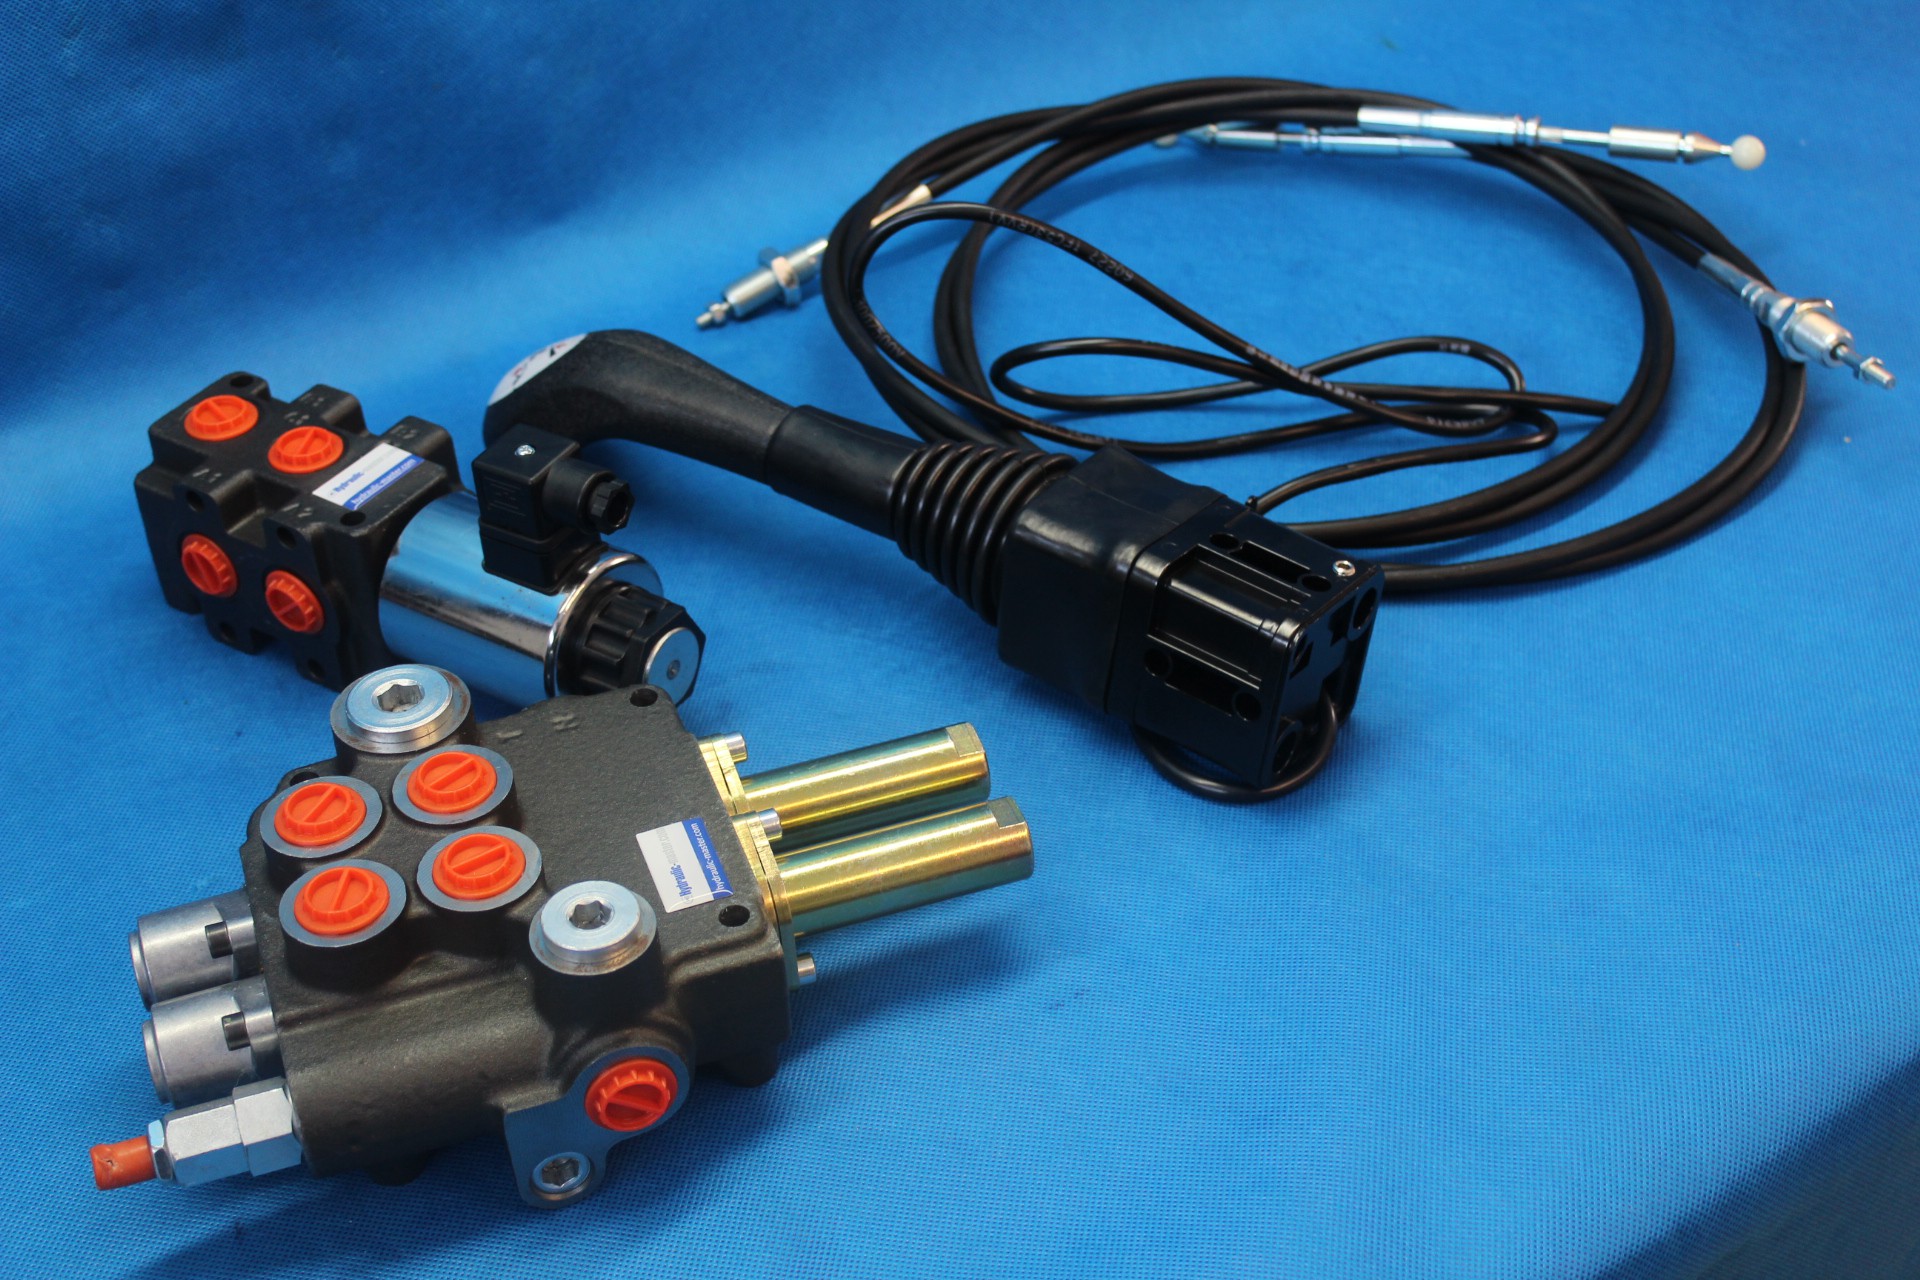 WITH THIS KIT YOU CAN CONTROL 3 SECTION USING ONE JOYSTICK